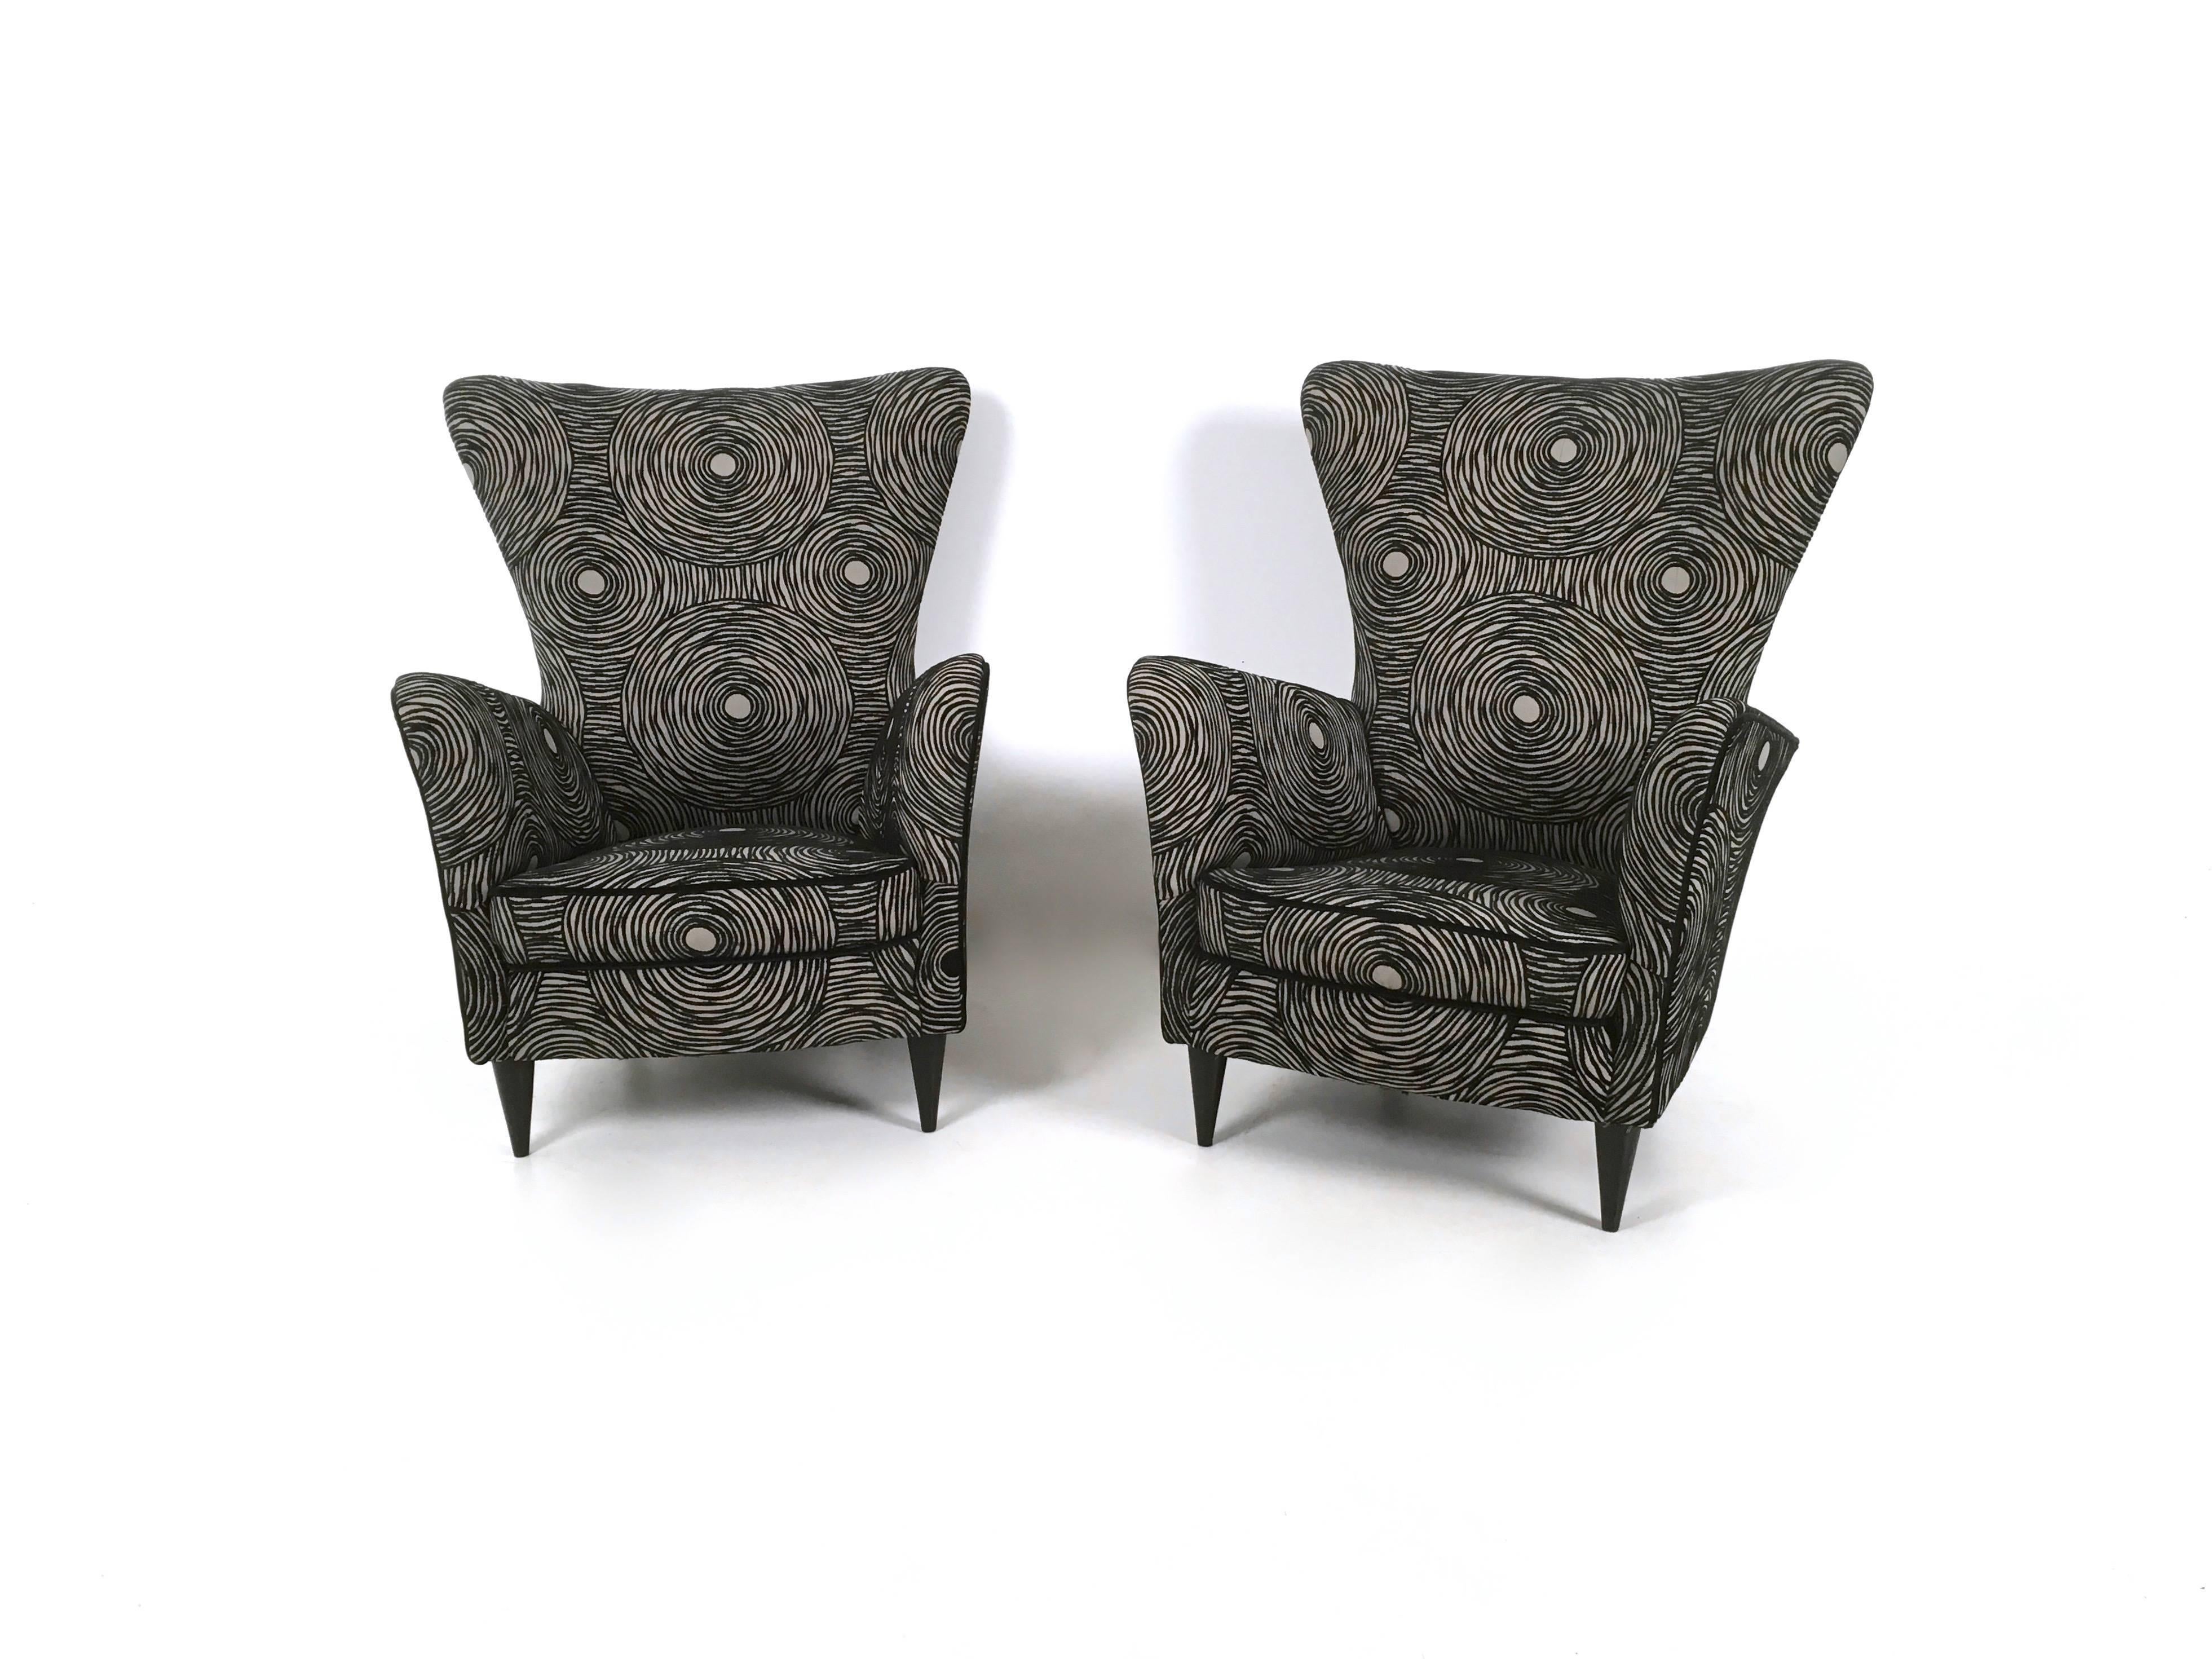 These armchairs are ascribable to Gio Ponti for Hotel Bristol Merano.
They are upholstered in fabric with a black a white pattern and feature ebonized wood feet.
The upholstery is new.
They may show slight traces of use since they're vintage, but